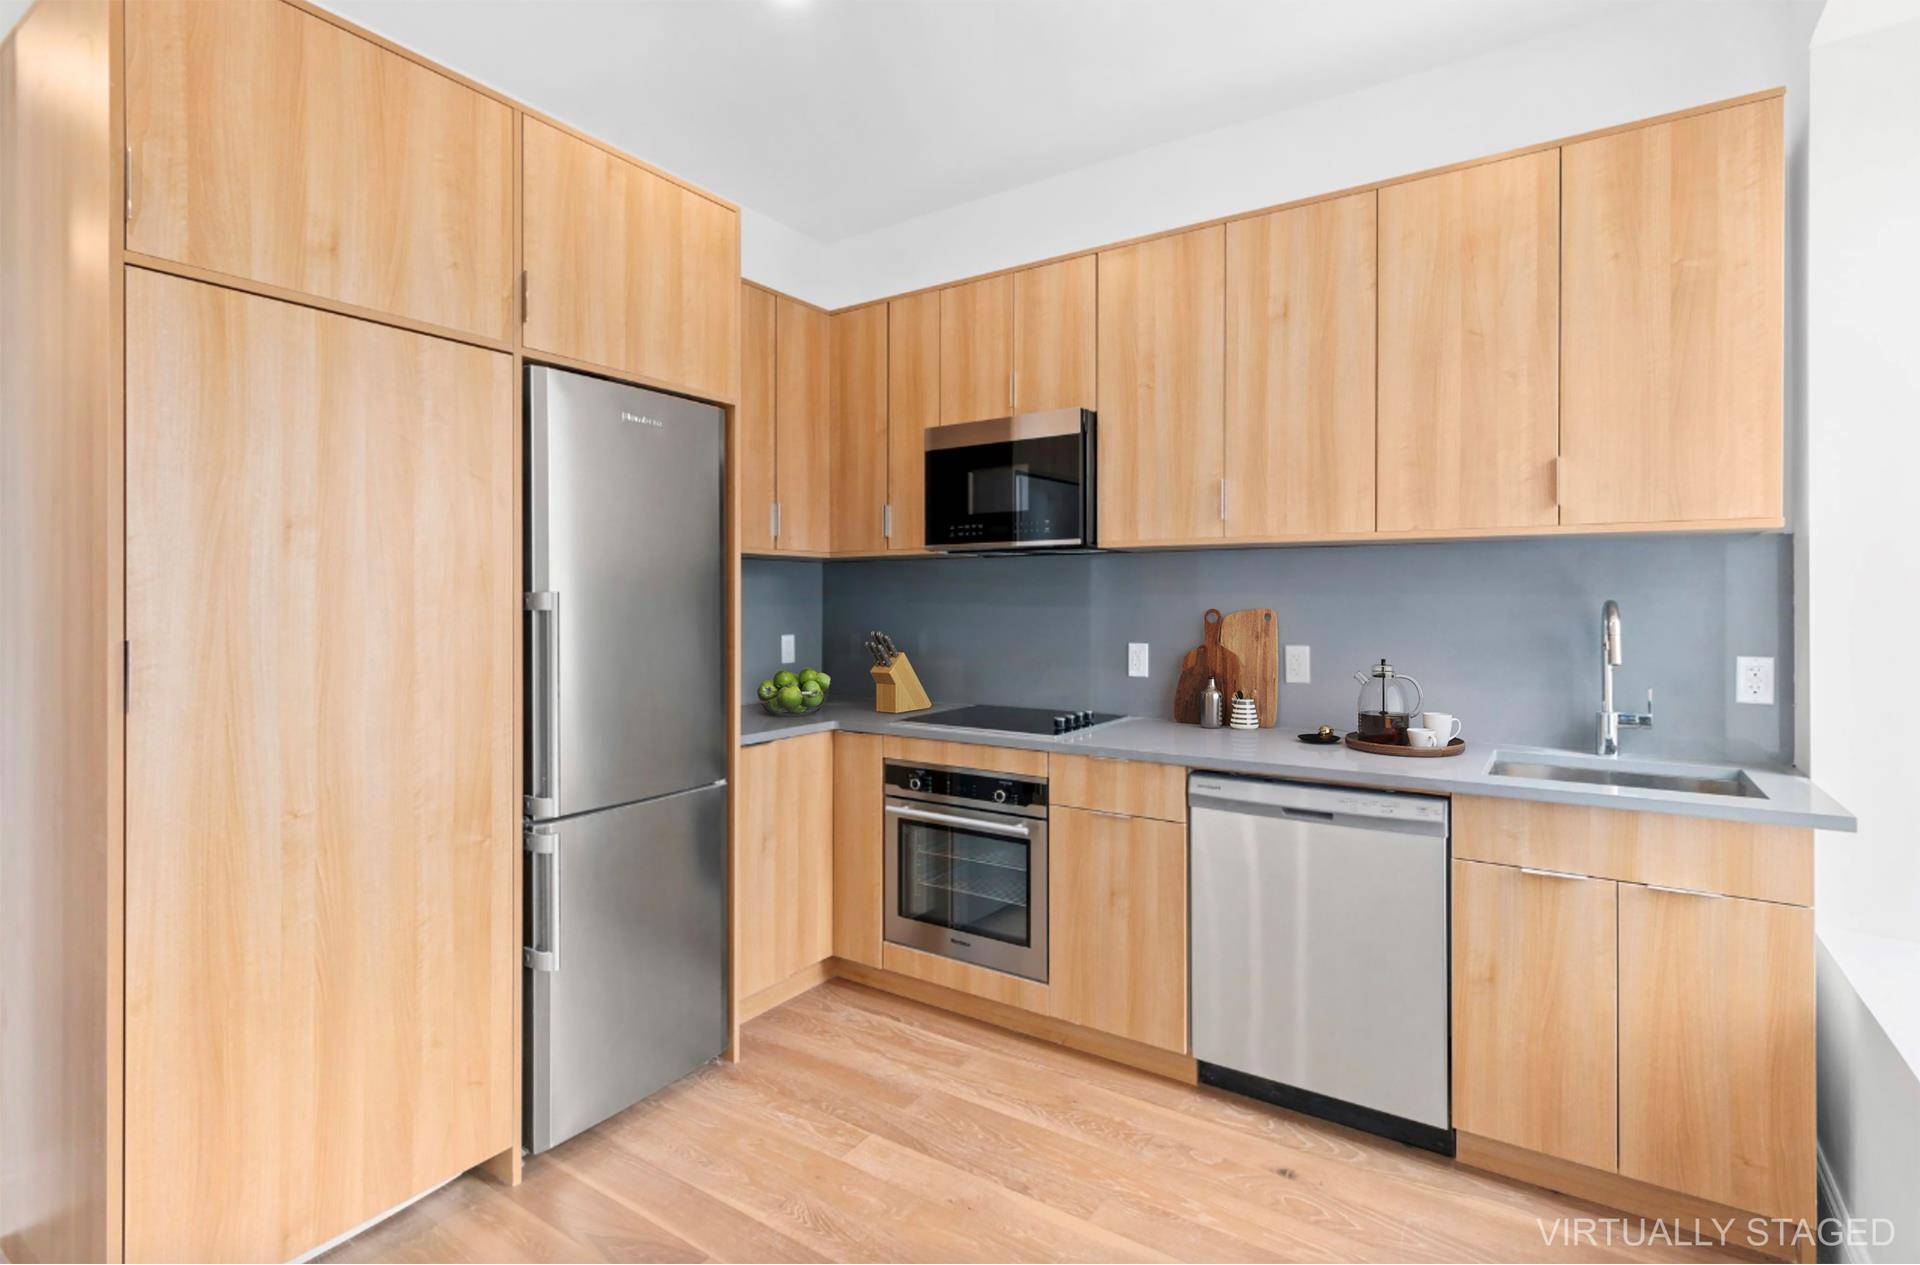 374 Court Street is a collection of four brand new, full floor rental units in the heart of Carroll Gardens.